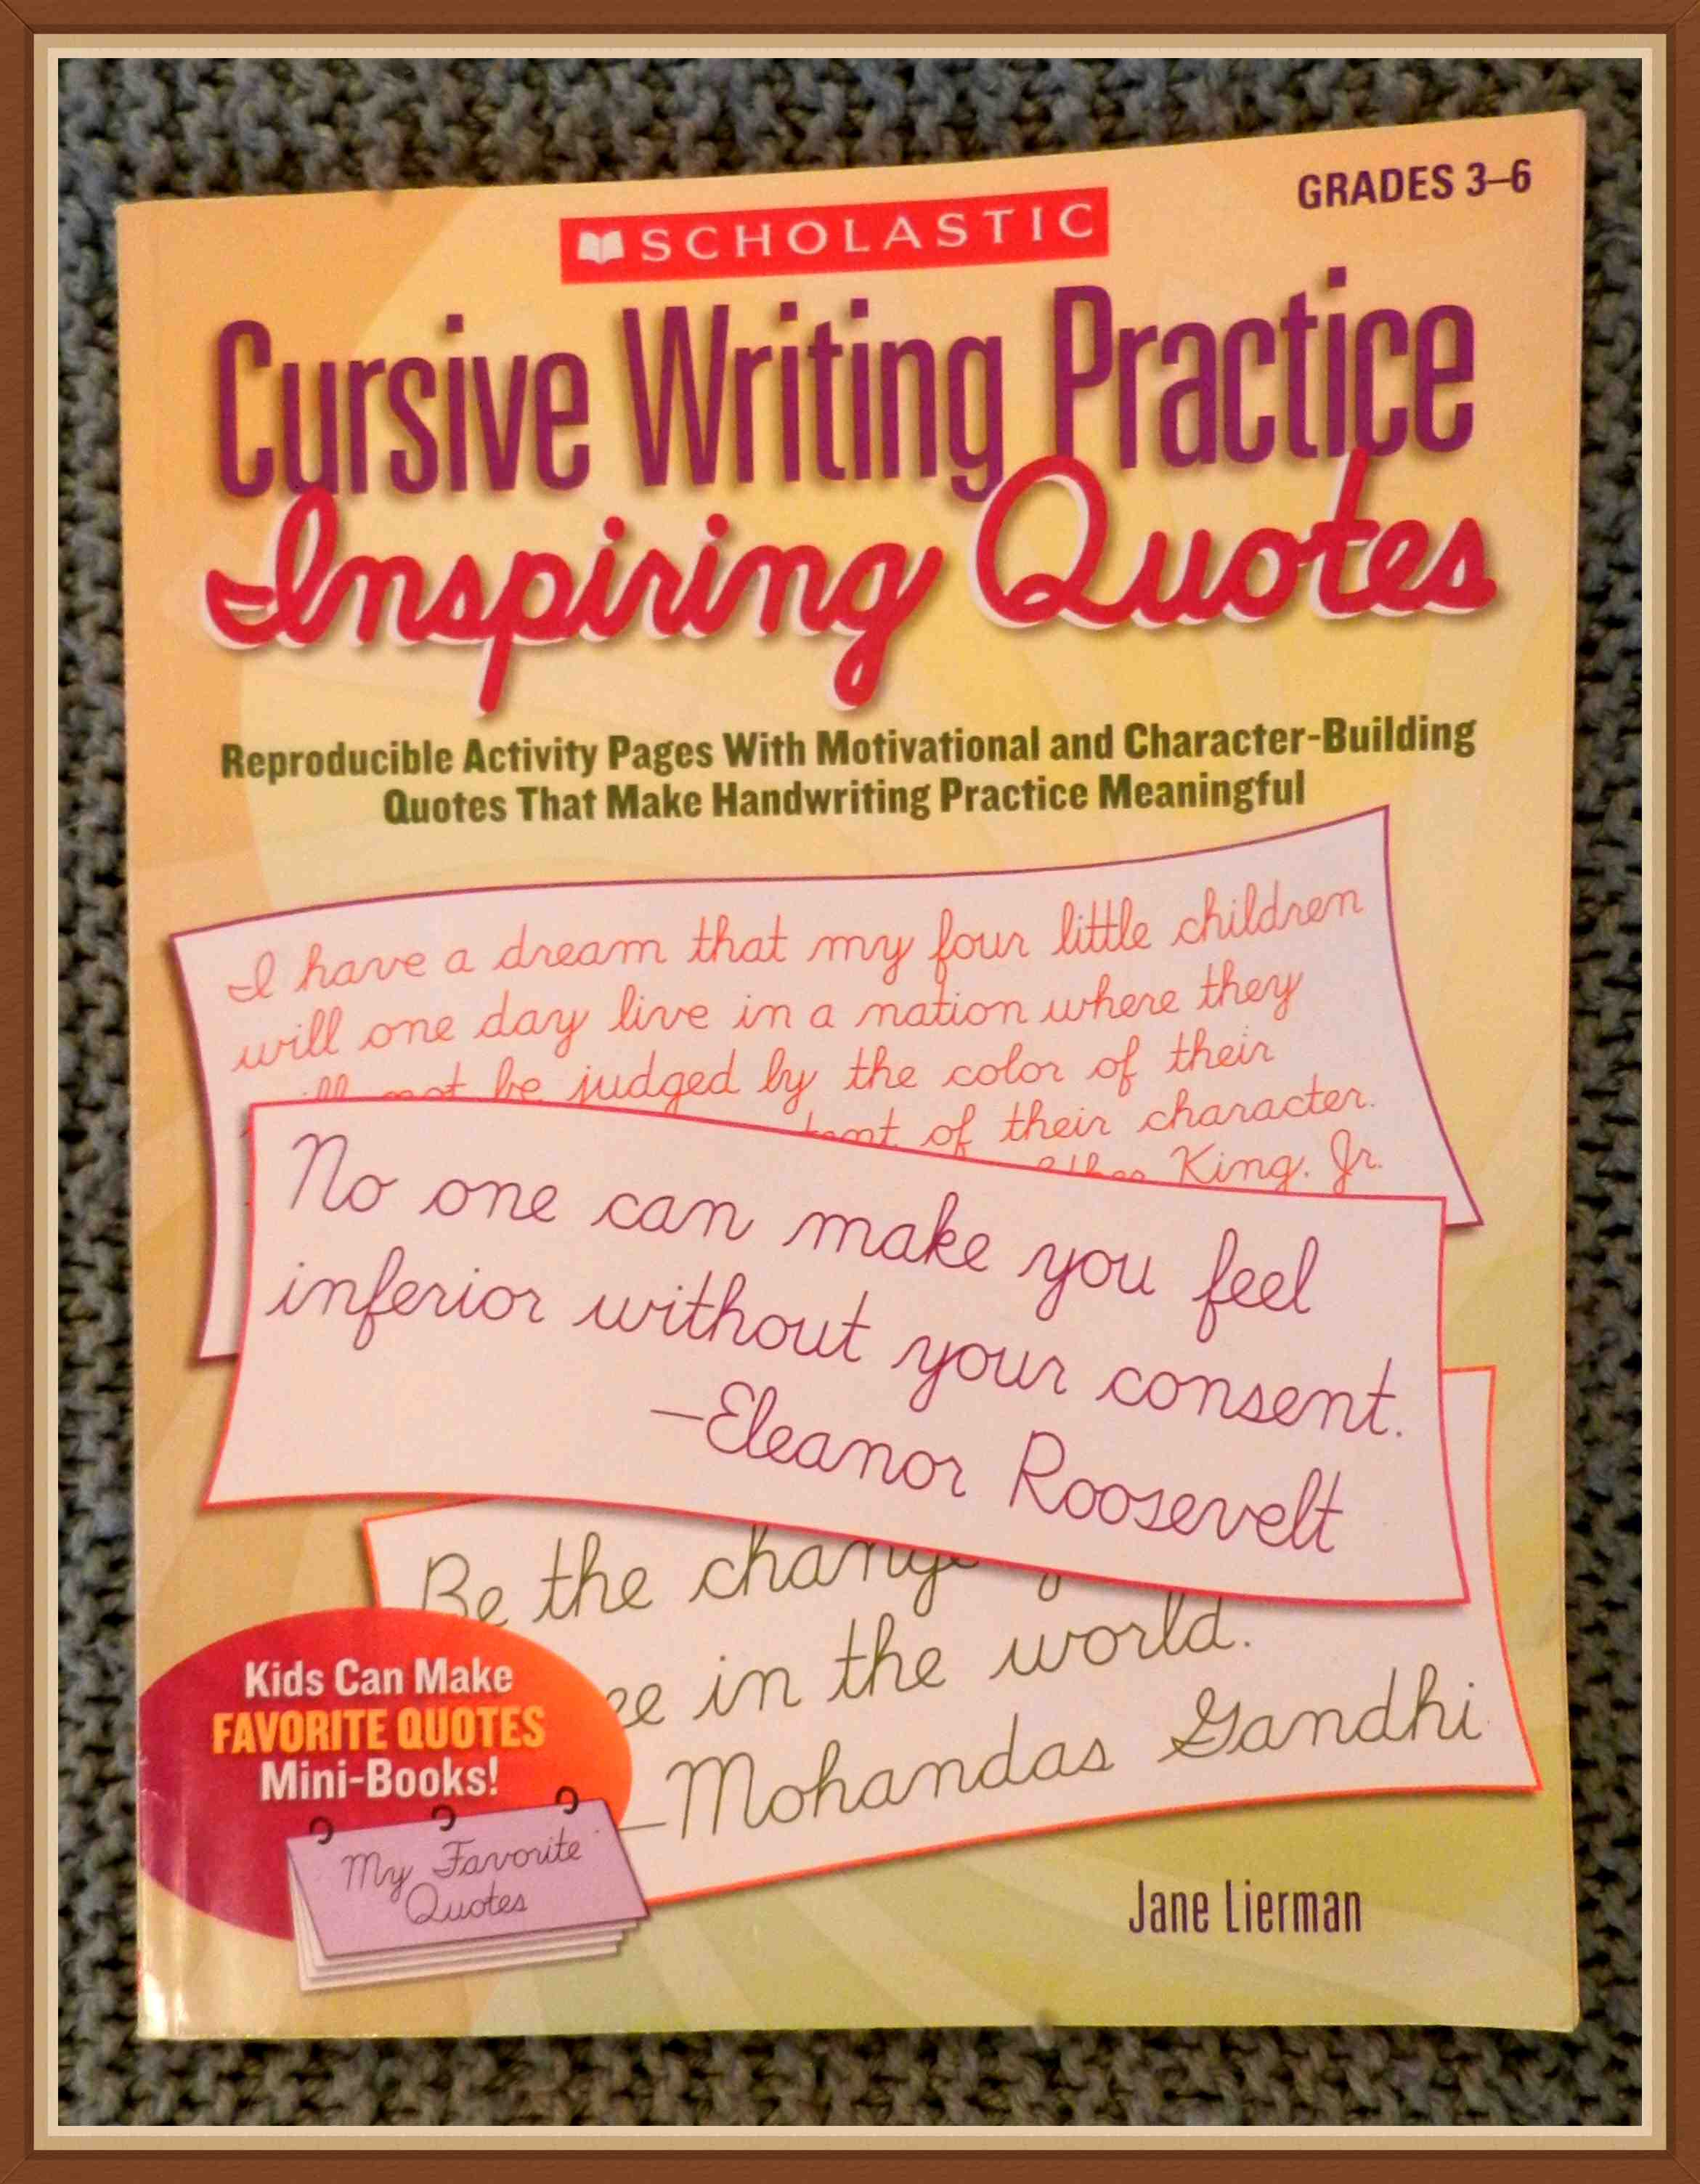 inspiring-quotes-cursive-writing-practice-my-review-the